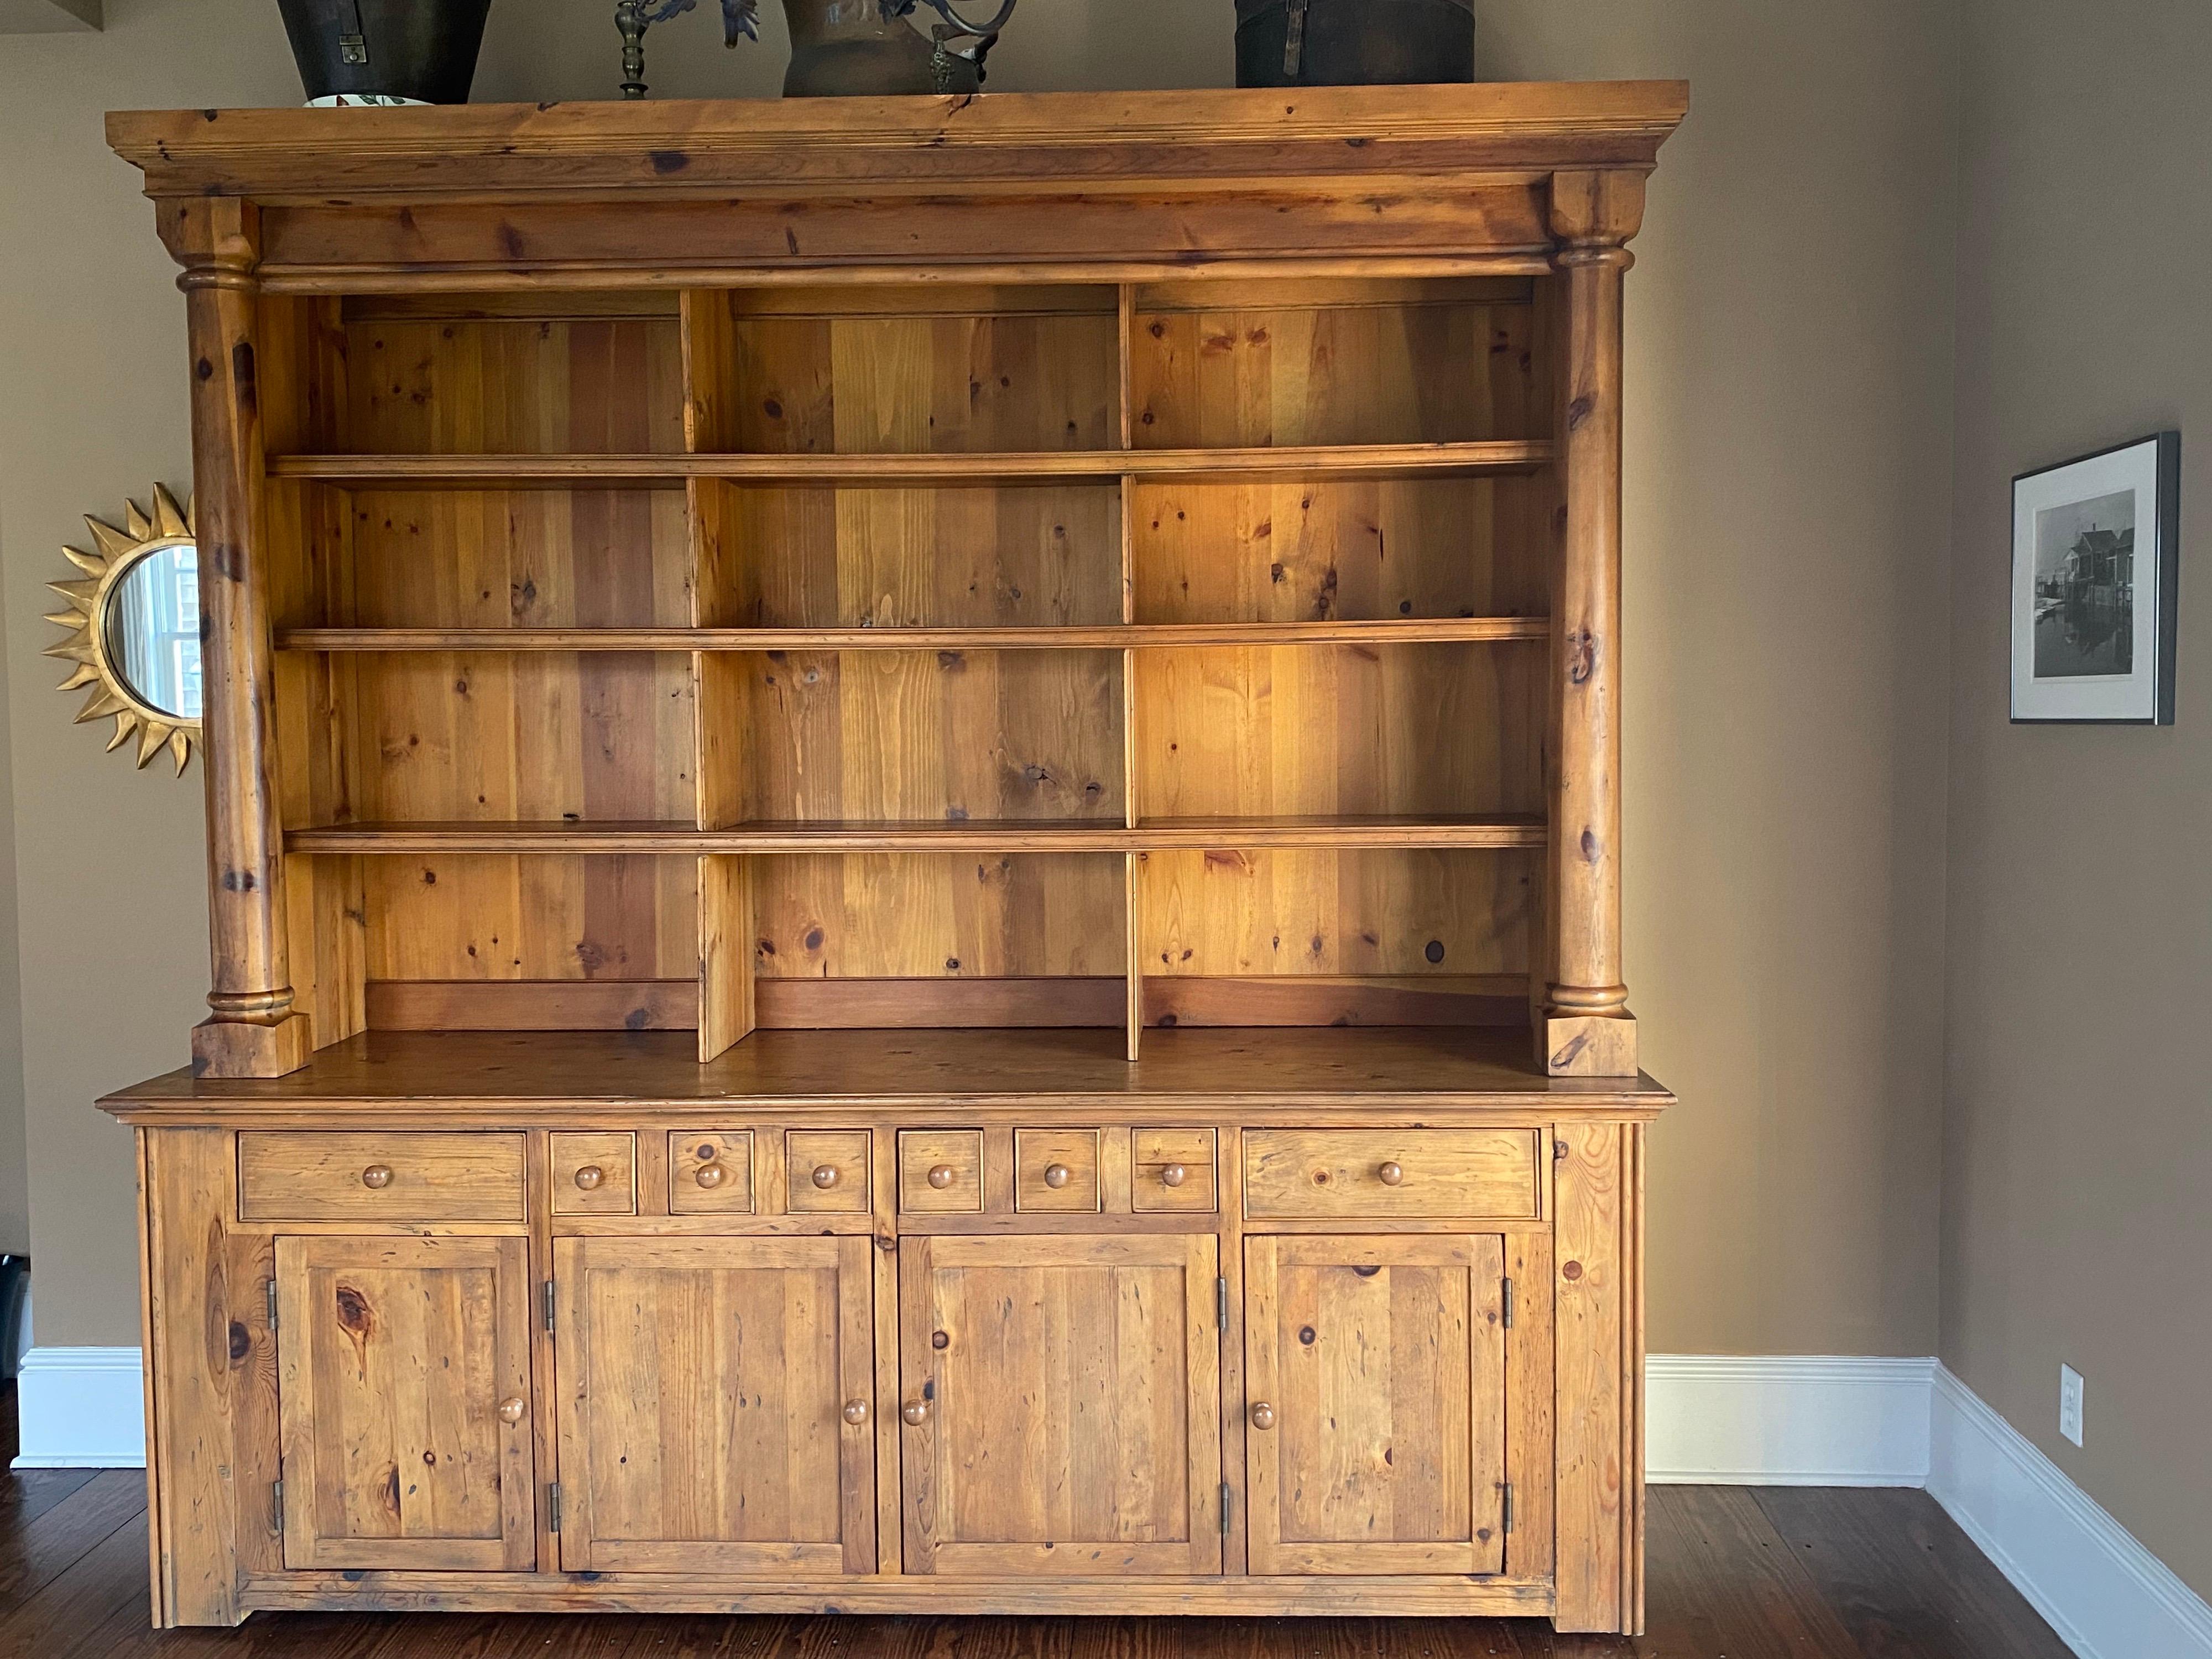 Ralph Lauren Bromley solid pine bookcase display hutch with storage base cabinet. Unit is two pieces that attach. The top features stepped cornice upheld by columns on either side. Three stationary shelves with three sections across. The bottom